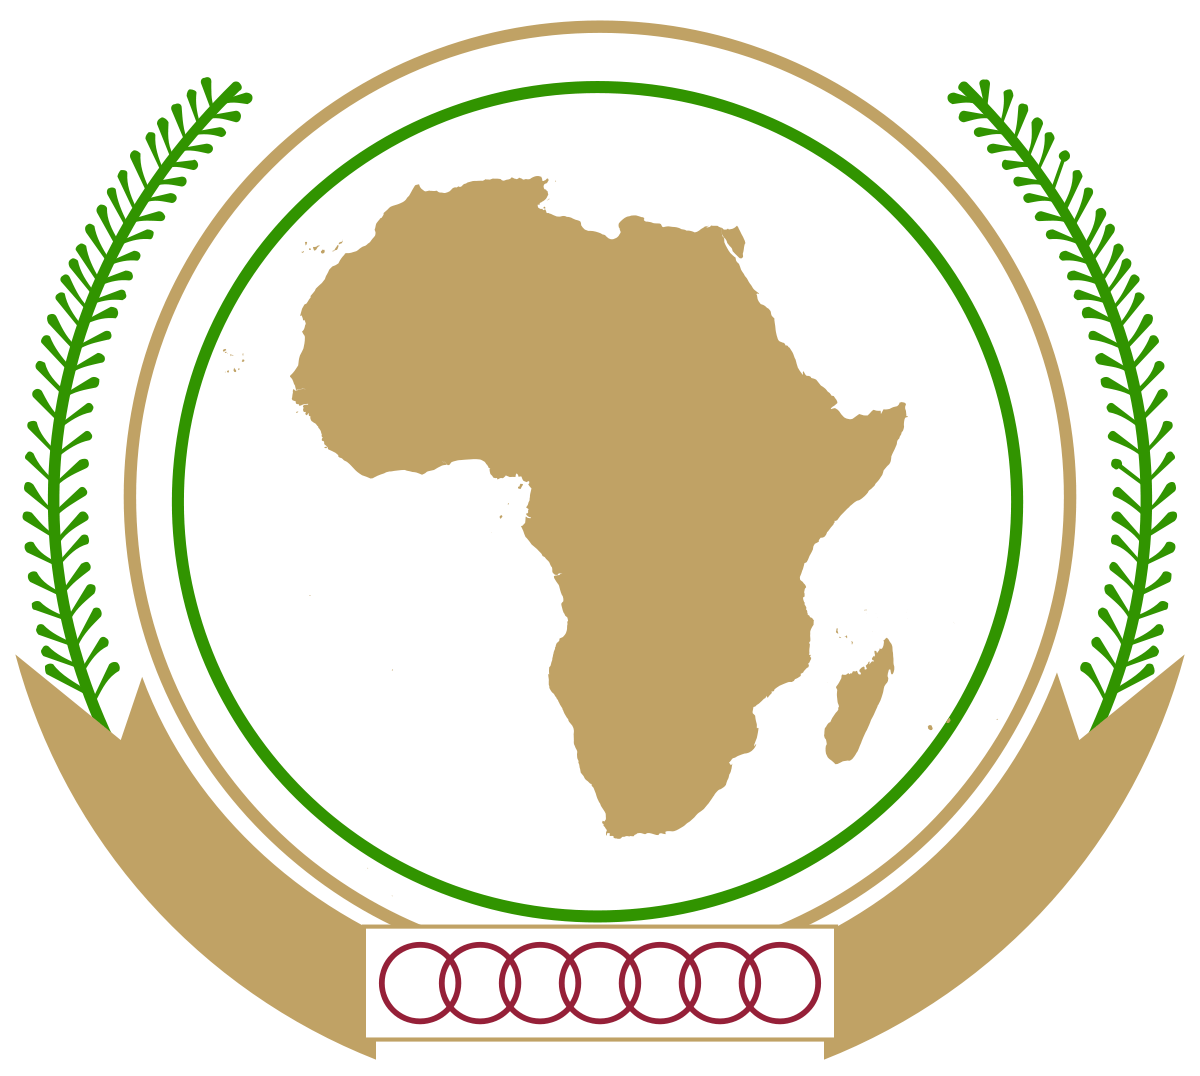 African Union Logo - Emblem of the African Union